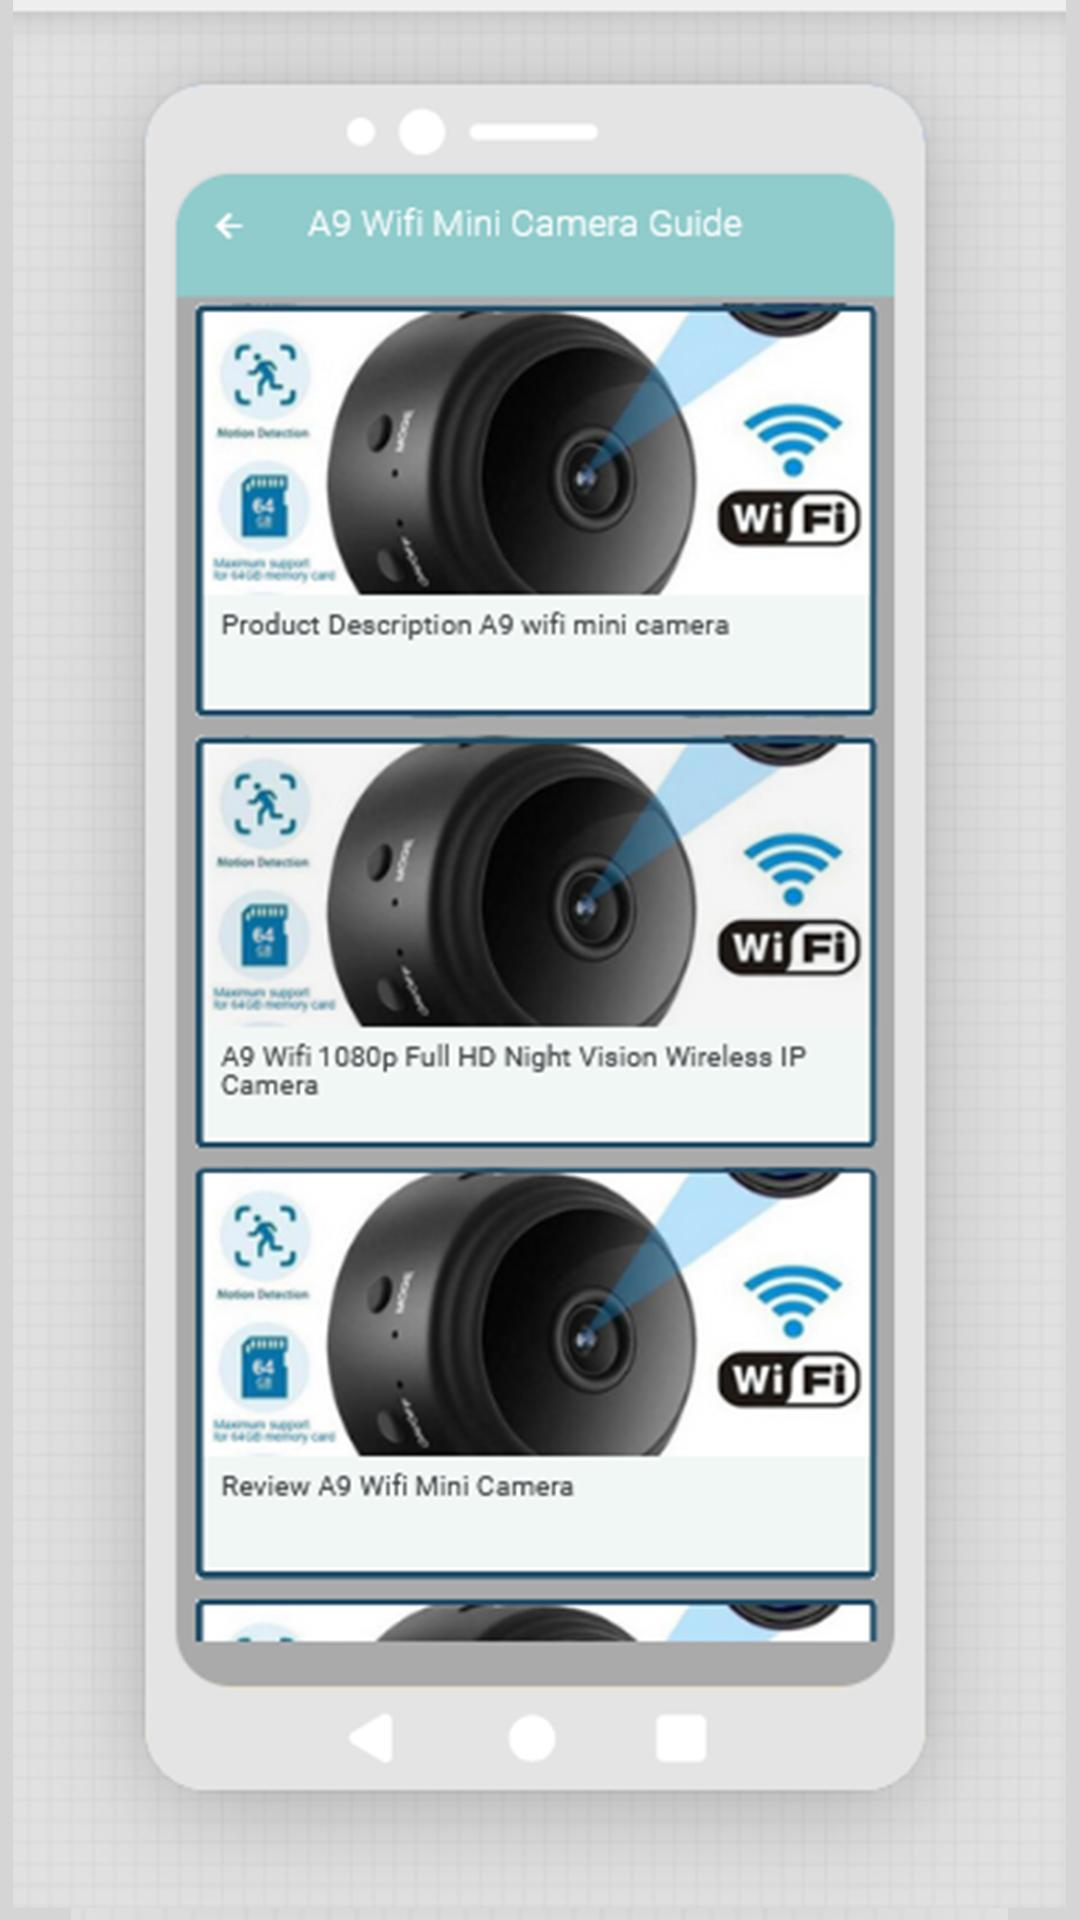 Ctronics wifi camera guide – Apps on Google Play